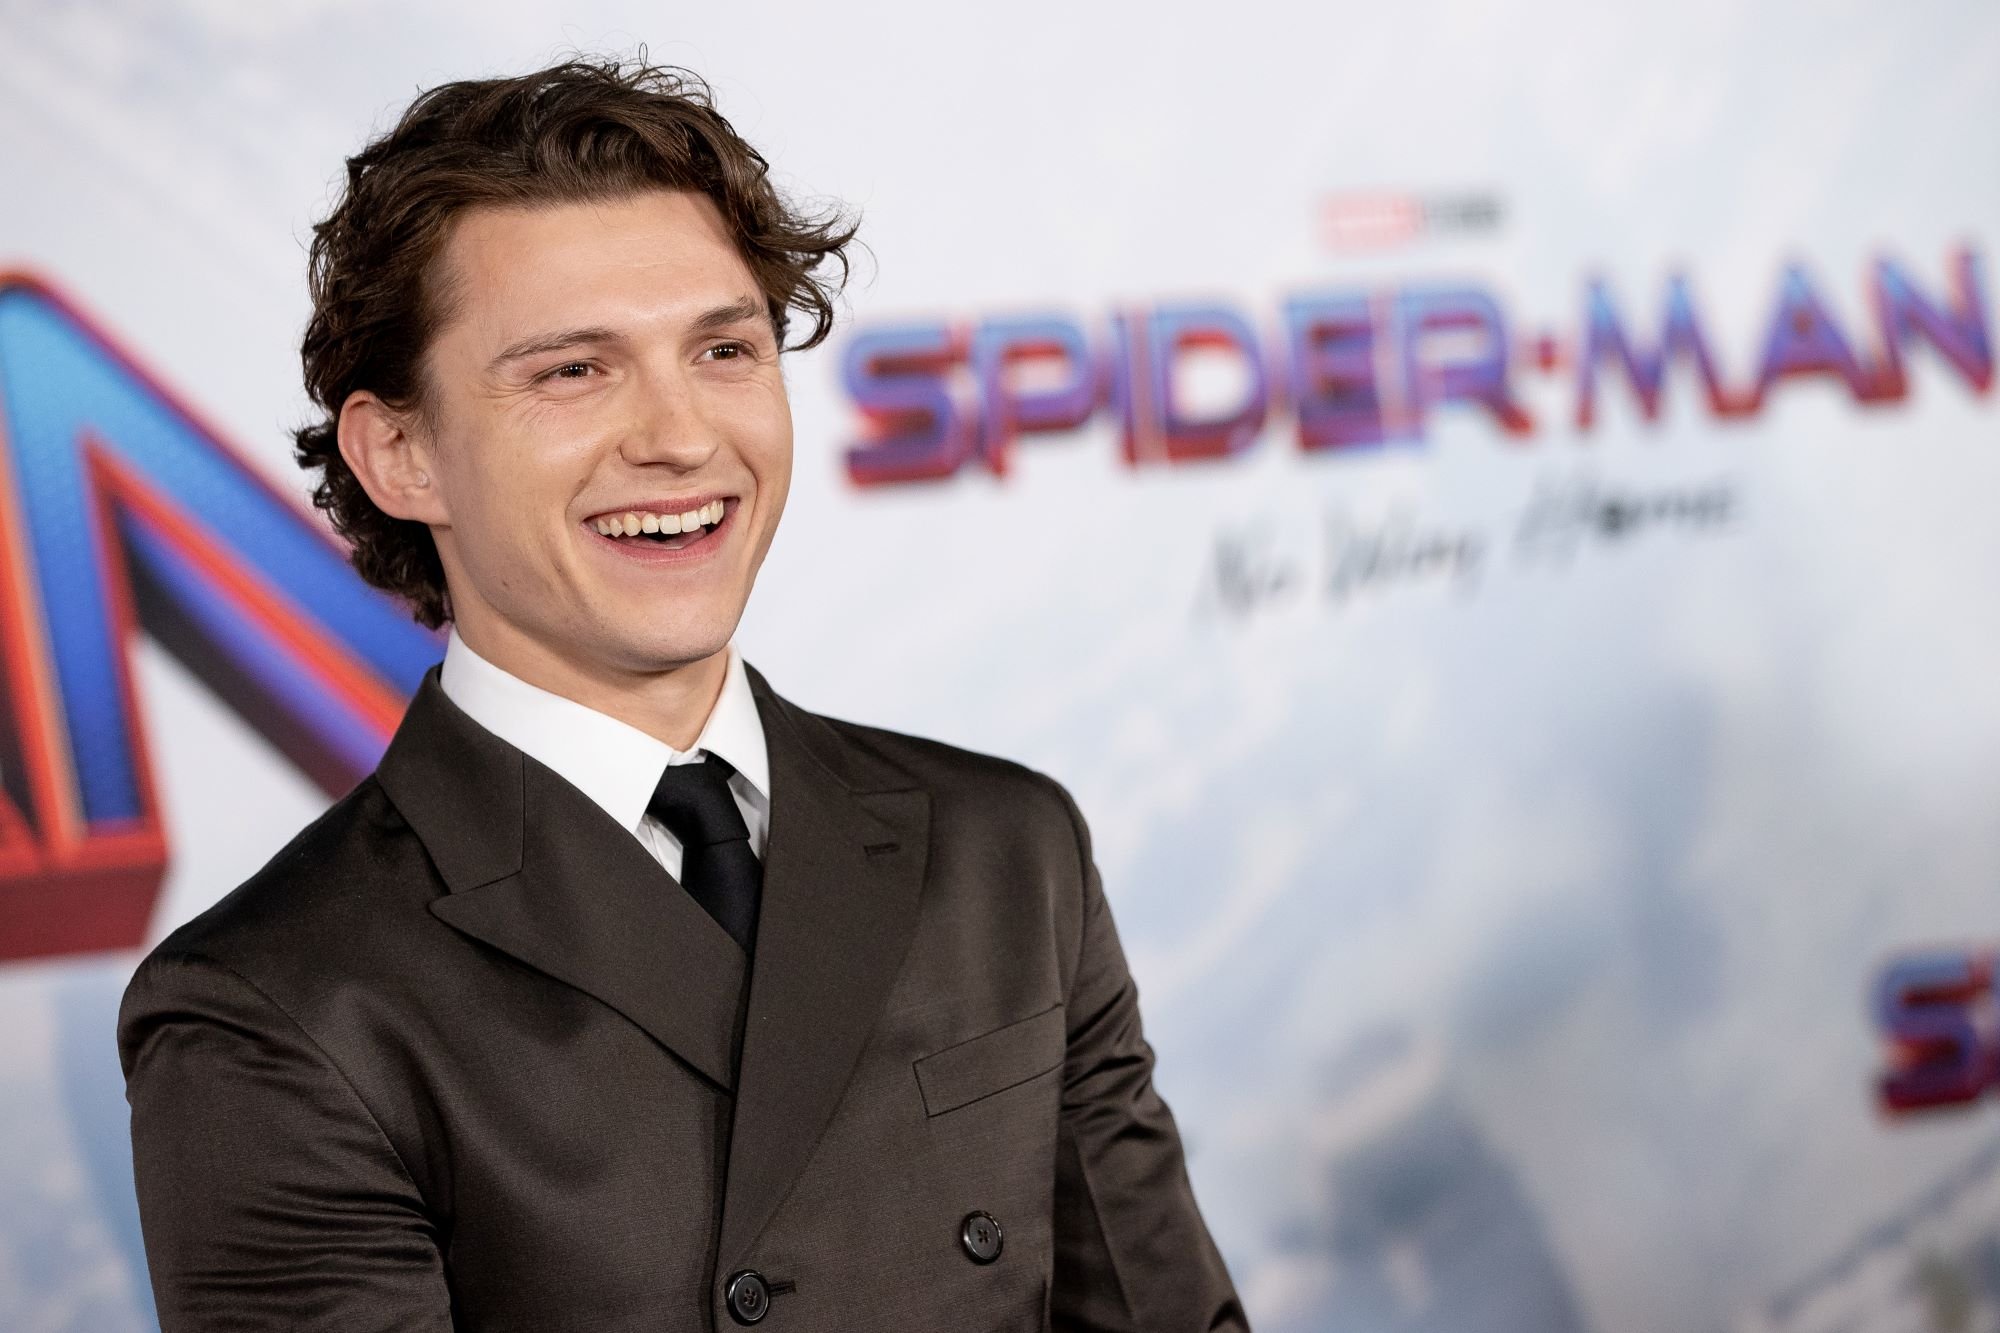 'Spider-Man: No Way Home' star Tom Holland, who wants to work with Florence Pugh in the MCU, wears a dark gray suit jacket over a white button-up shirt and black tie.